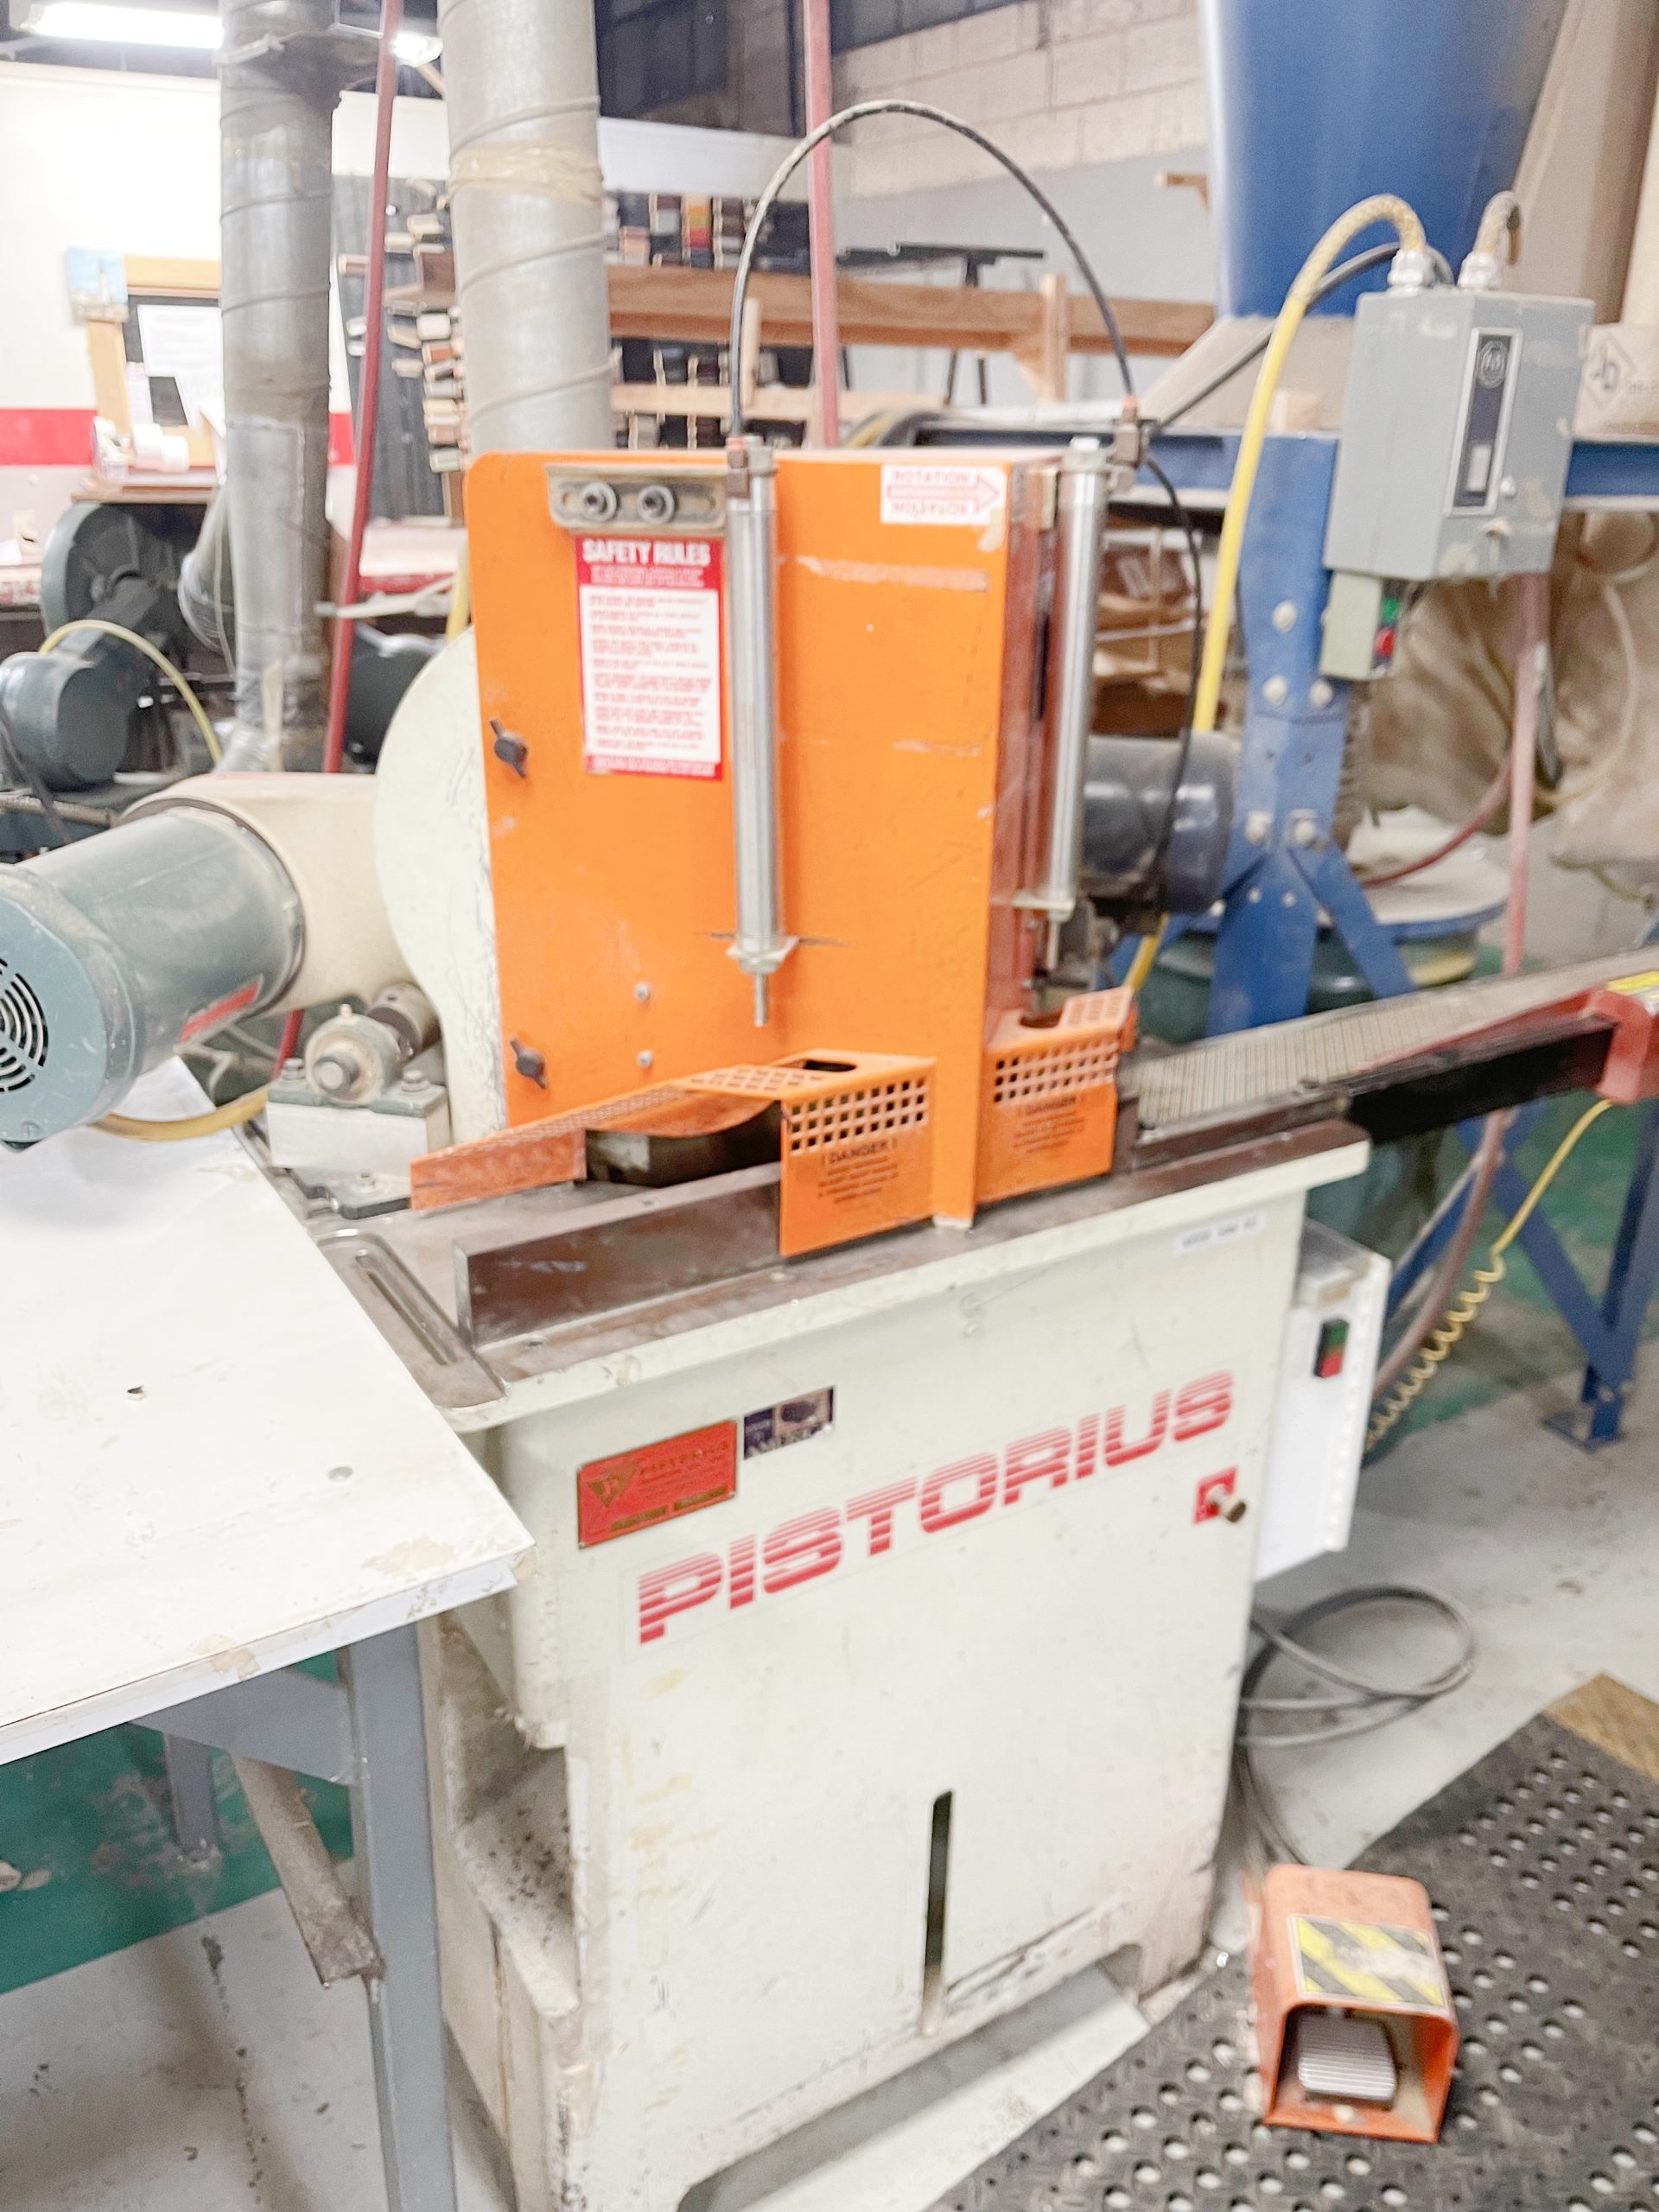 Equipment Lot: Pistorius Double Miter Saws, HeatSeal Shrink Wrap System, Wizard Eclipse Duo Mat Cutter & Supplies (Used) Item # UE-021622A (Kentucky)